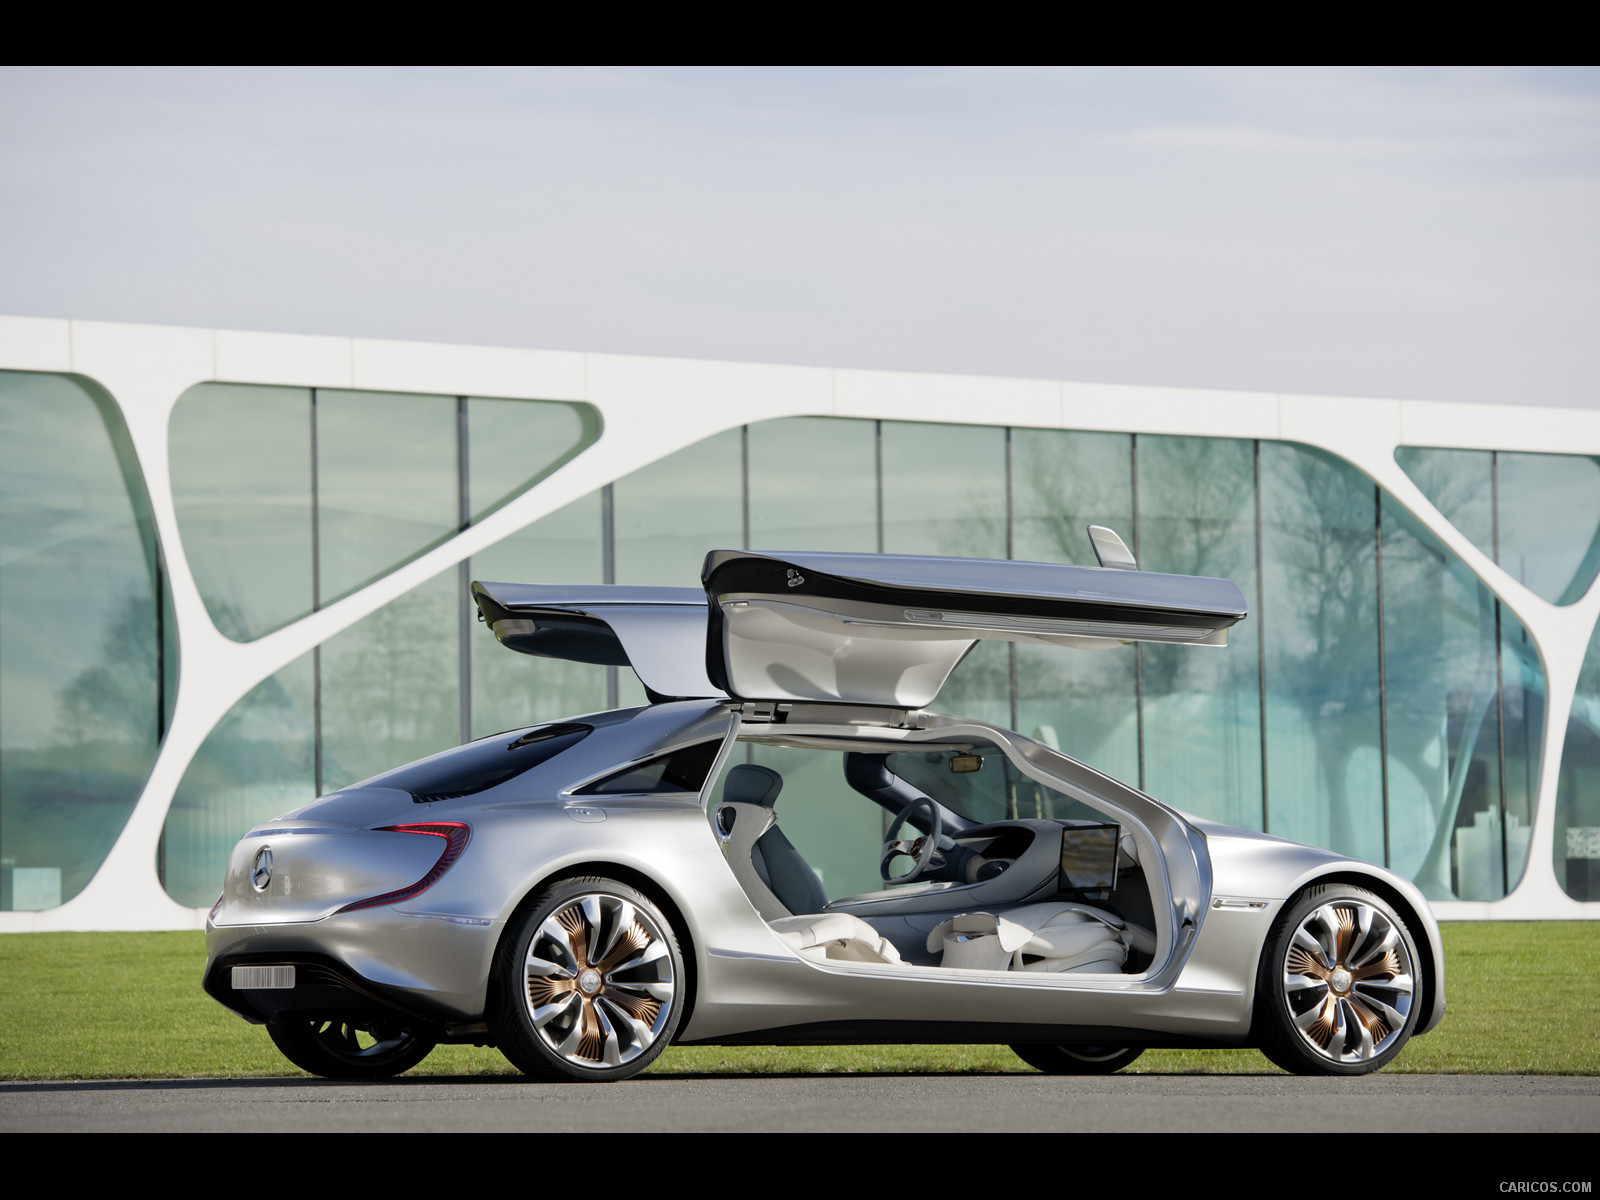 Mercedes-Benz F 125 Concept  - Side, #5 of 63